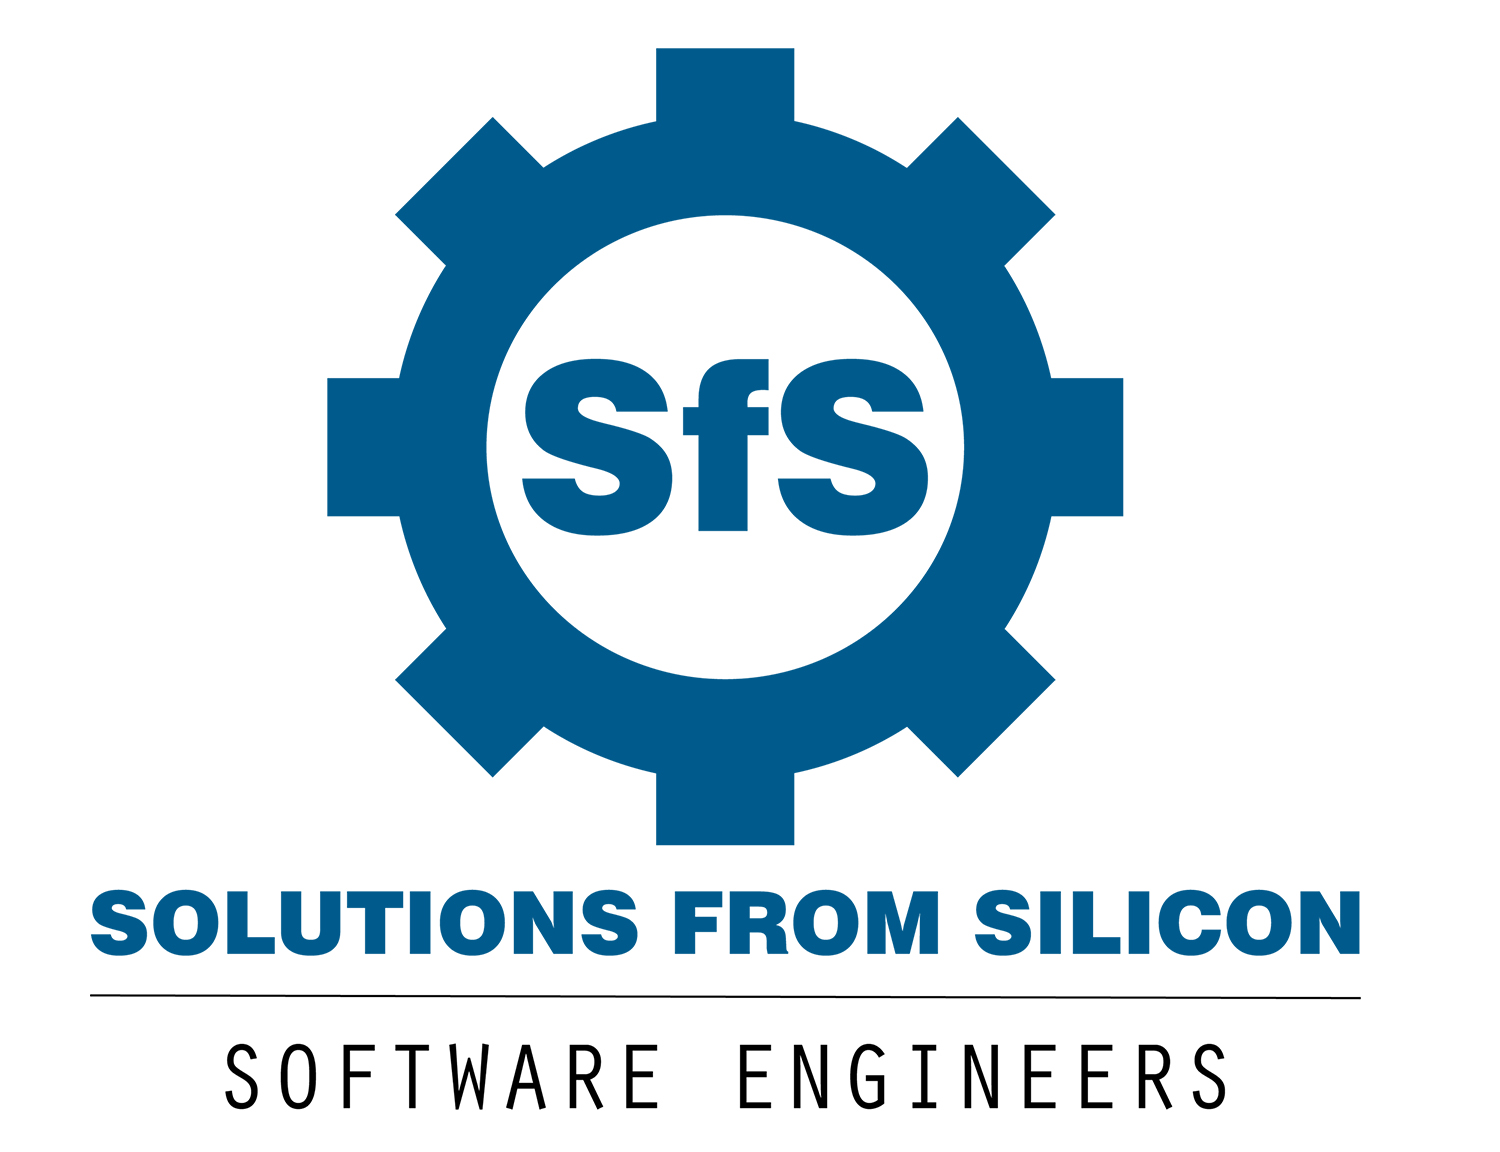 Solutions from Silicon